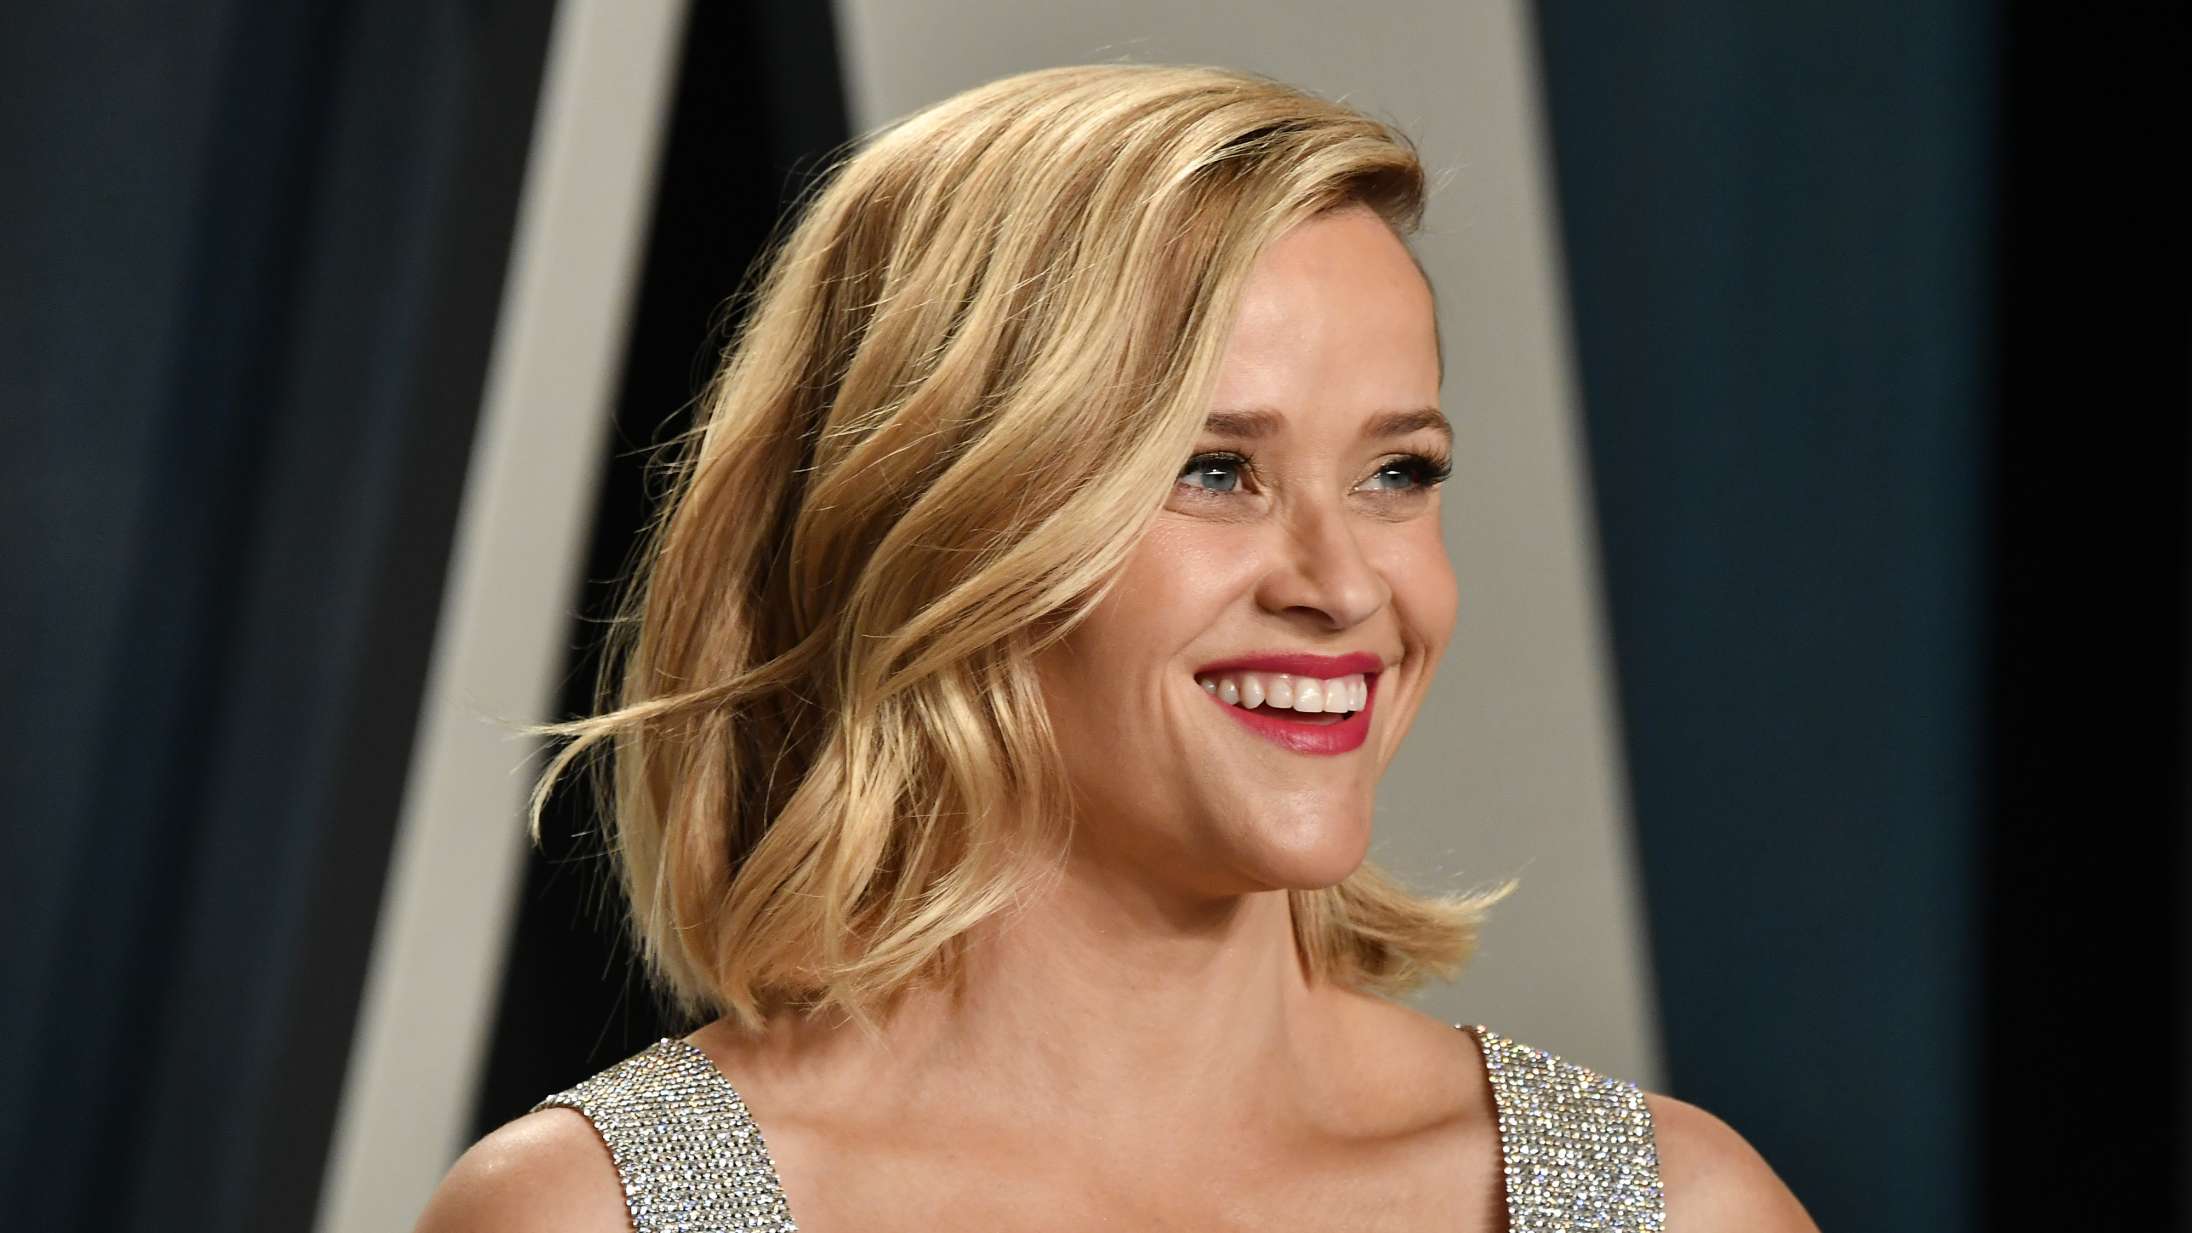 Er Reese Witherspoon ved at blive Twitters næste crypto bro?